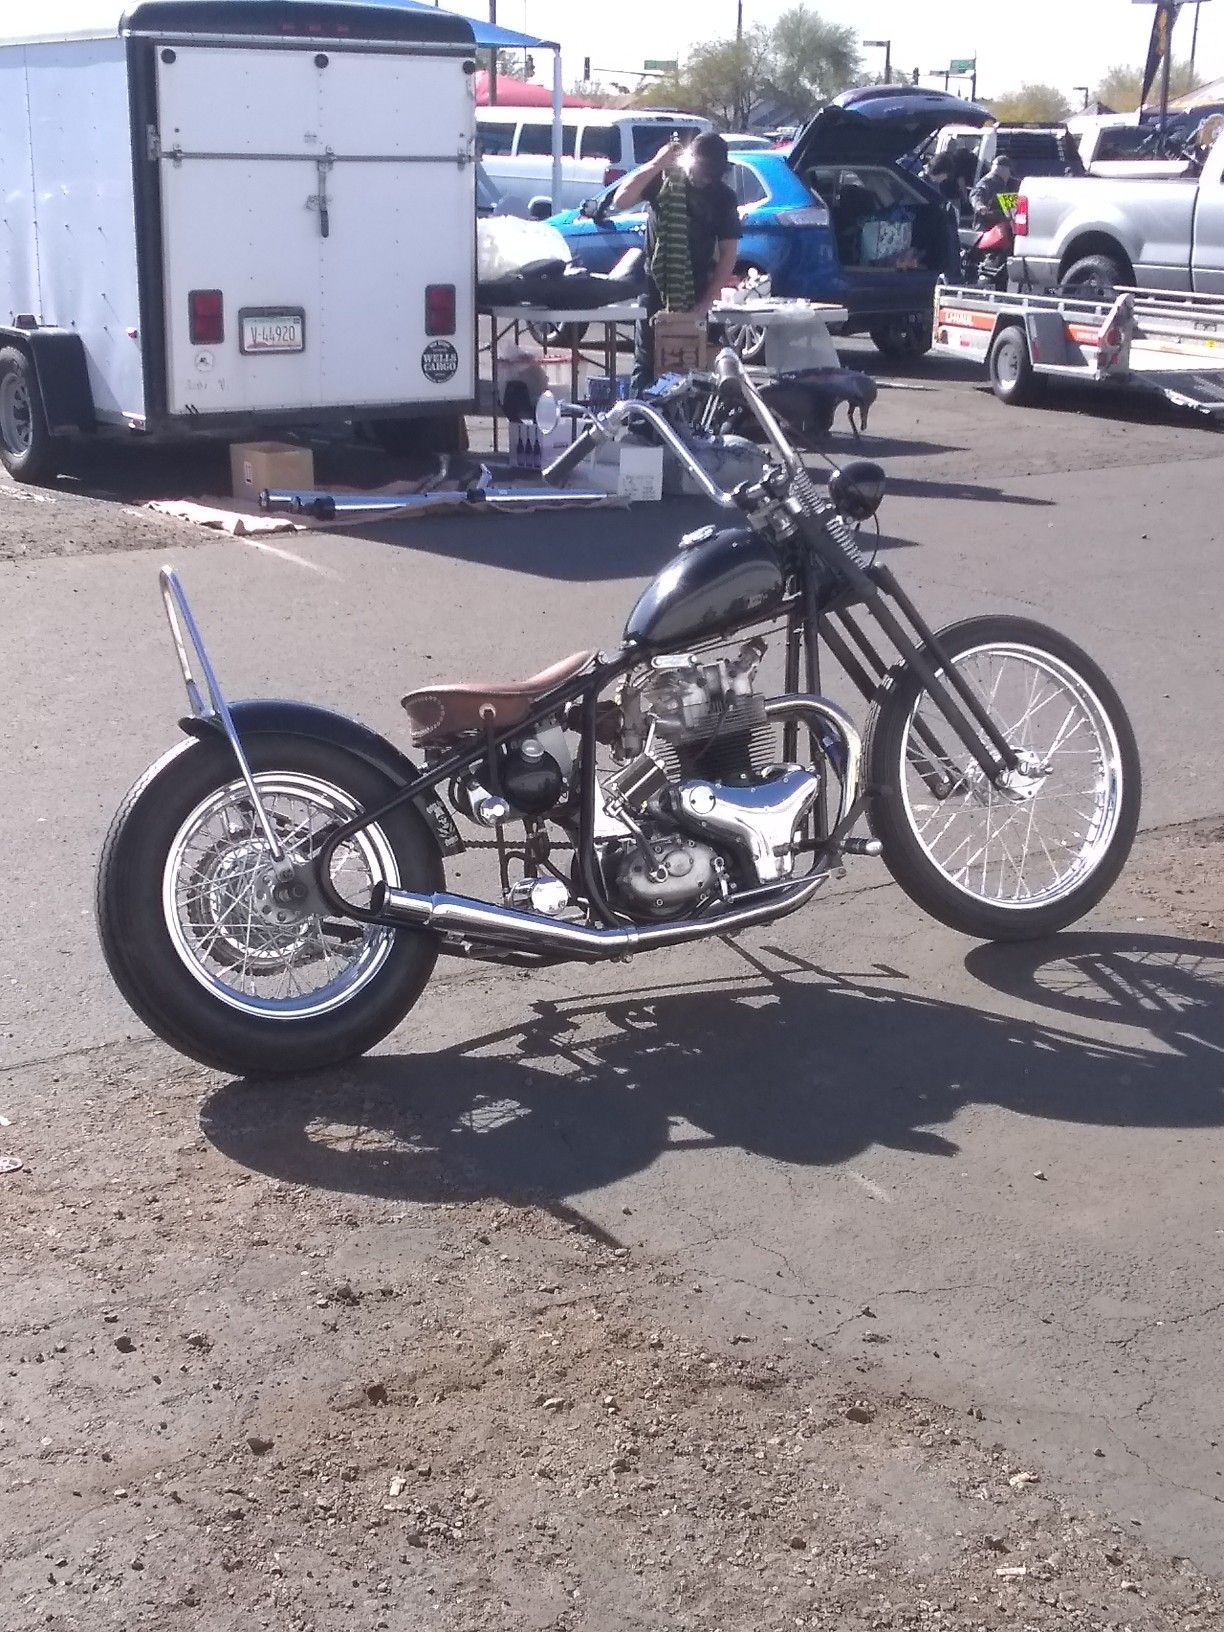 Bobber bsa 10 1958. 650 cc. I can trade for work truck or van